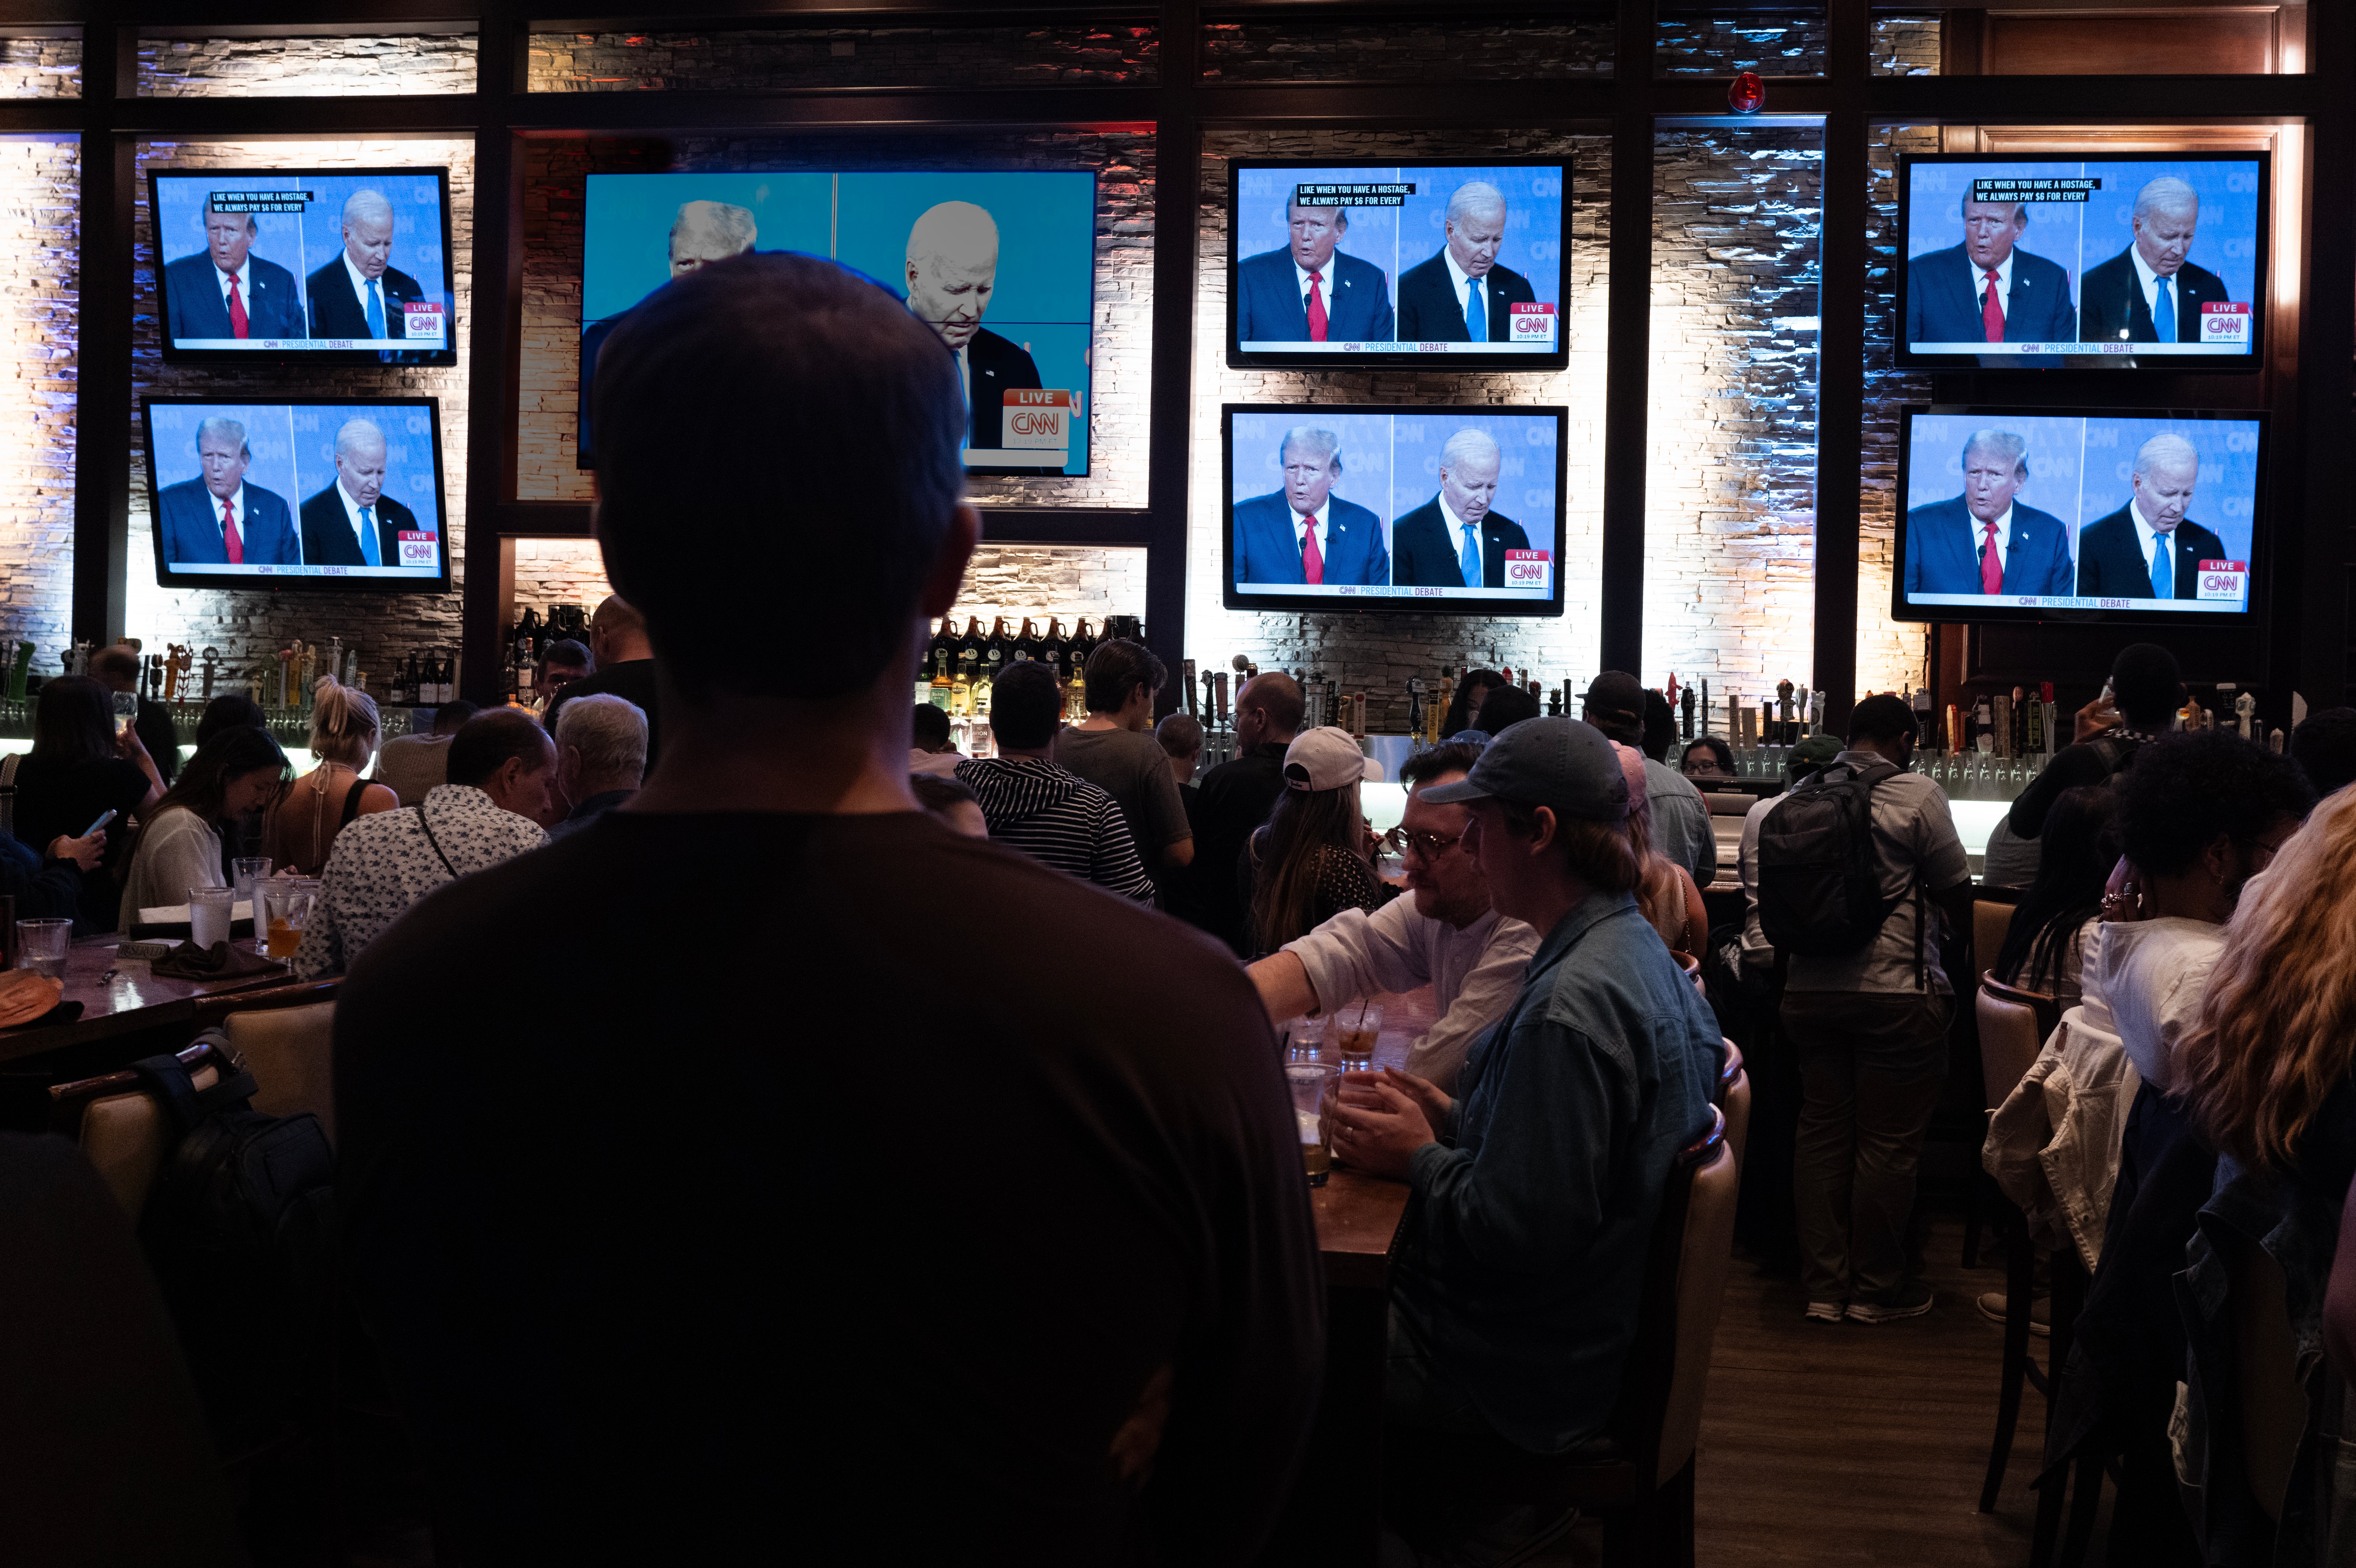 Many viewers took to social media to voice their disappointment around the debate’s handling by CNN. Pictured: Customers at the Old Town Pour House in Chicago watch the debate